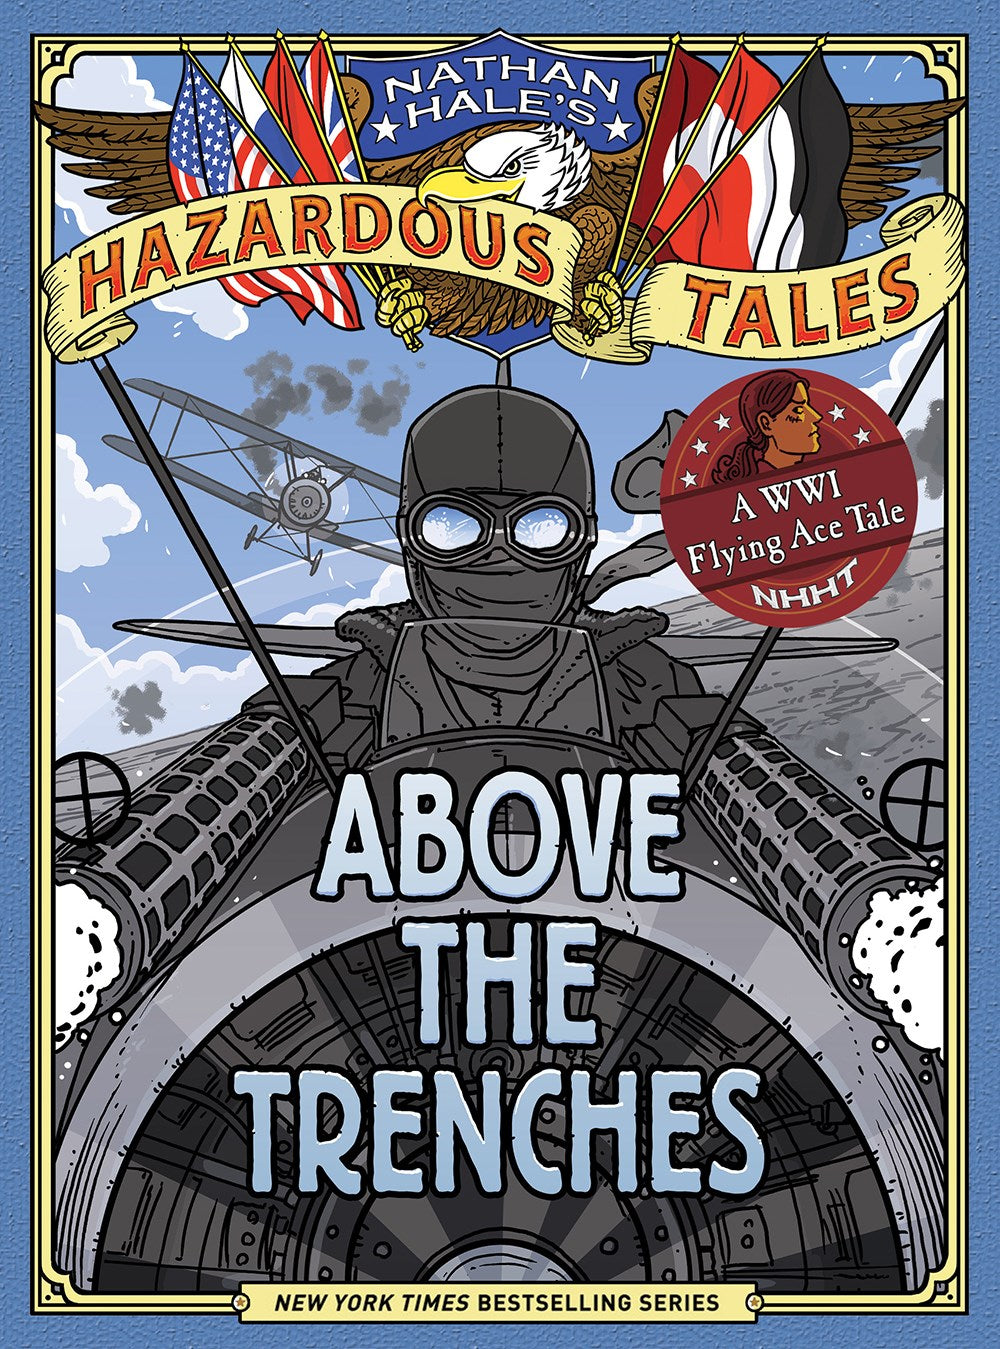 Nathan Hale's Hazardous Tales #12: Above the Trenches